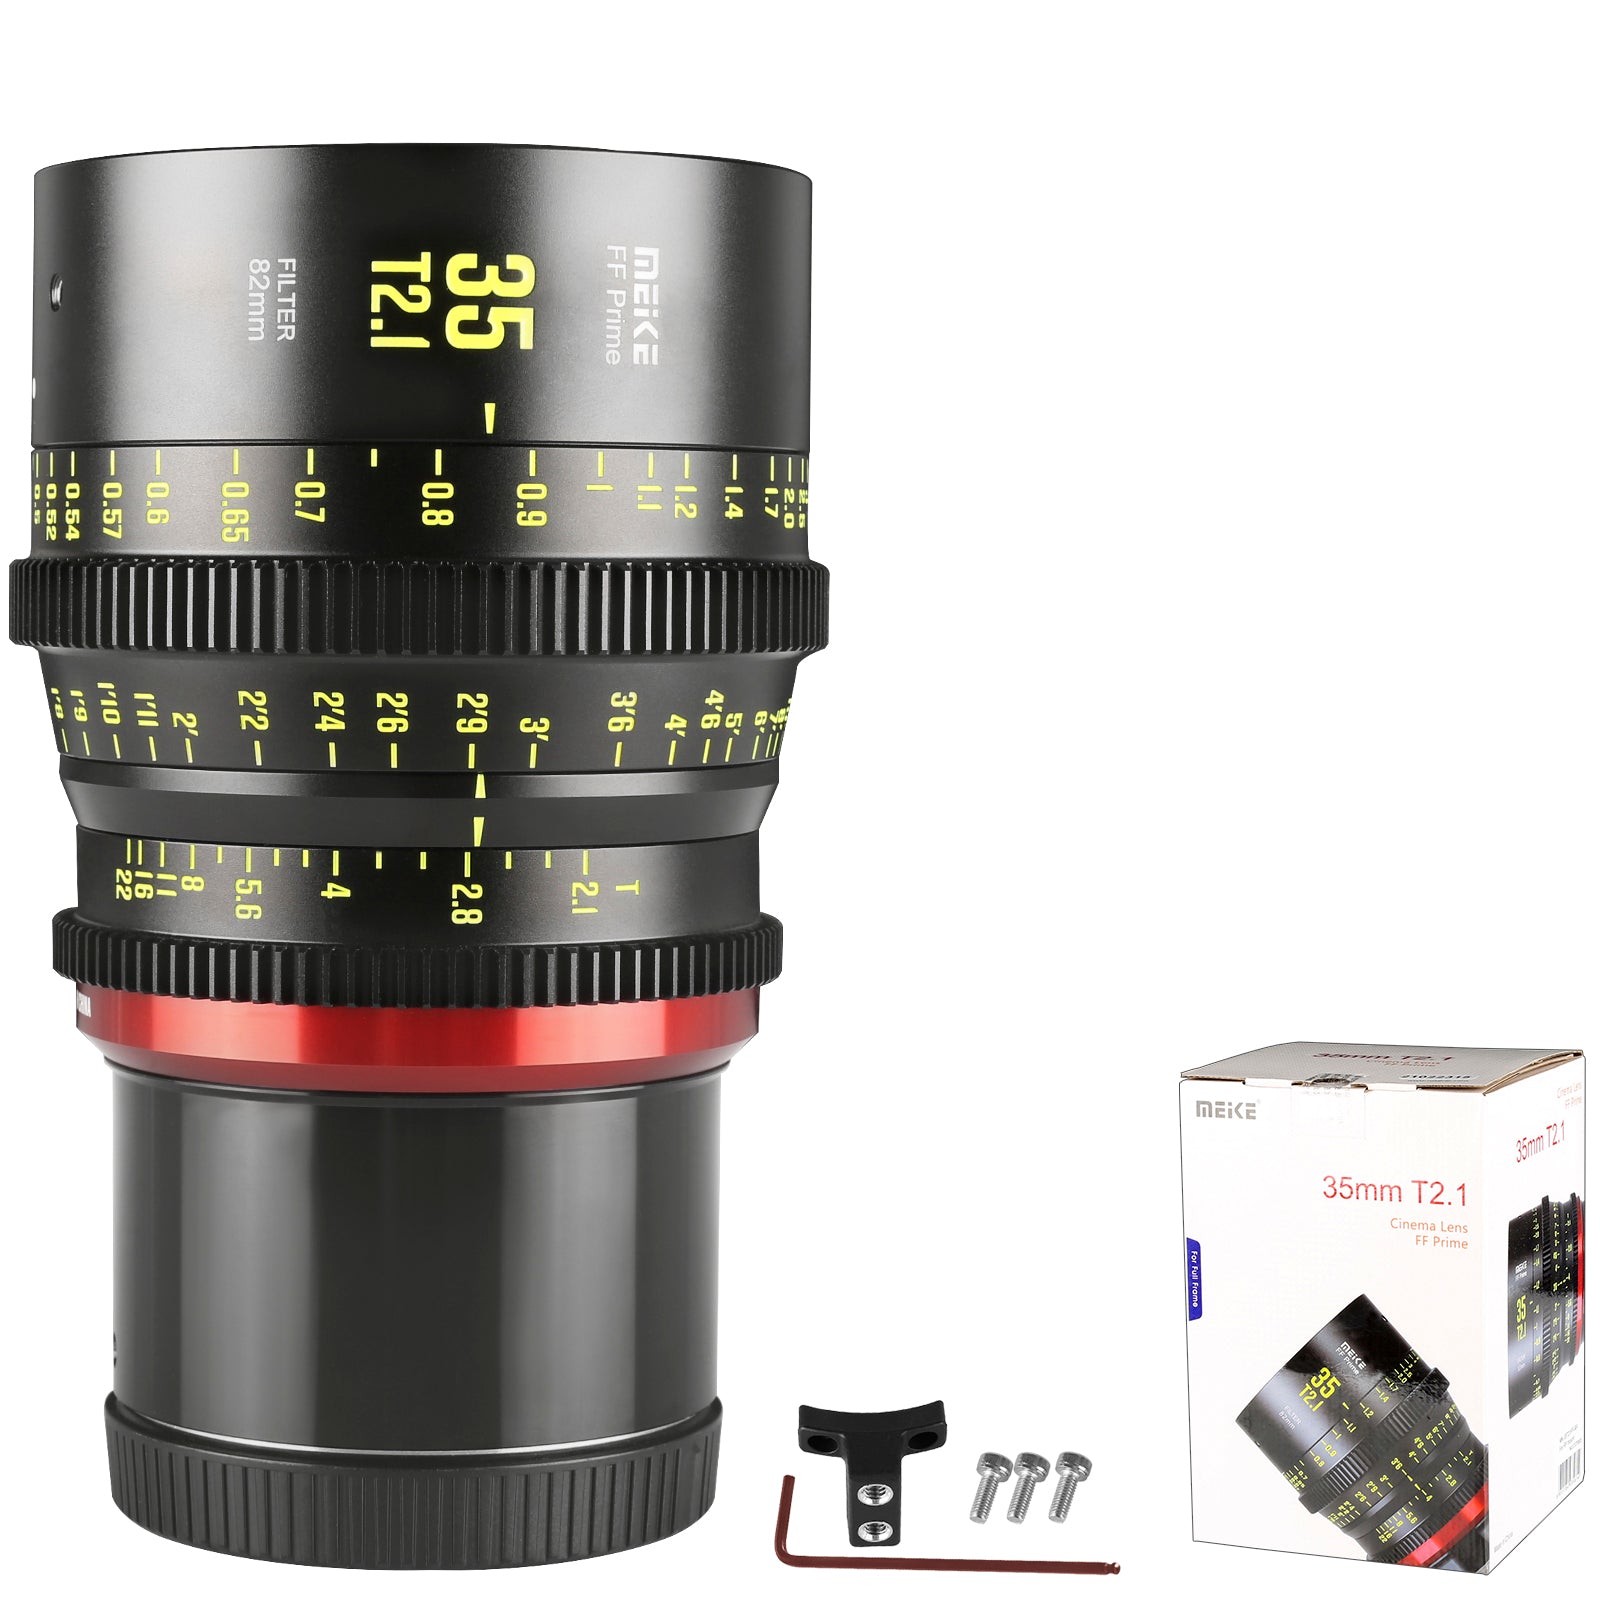 Meike Cinema Full Frame Cinema Prime 35mm T2.1 Lens (RF Mount) with Accessories and a Box